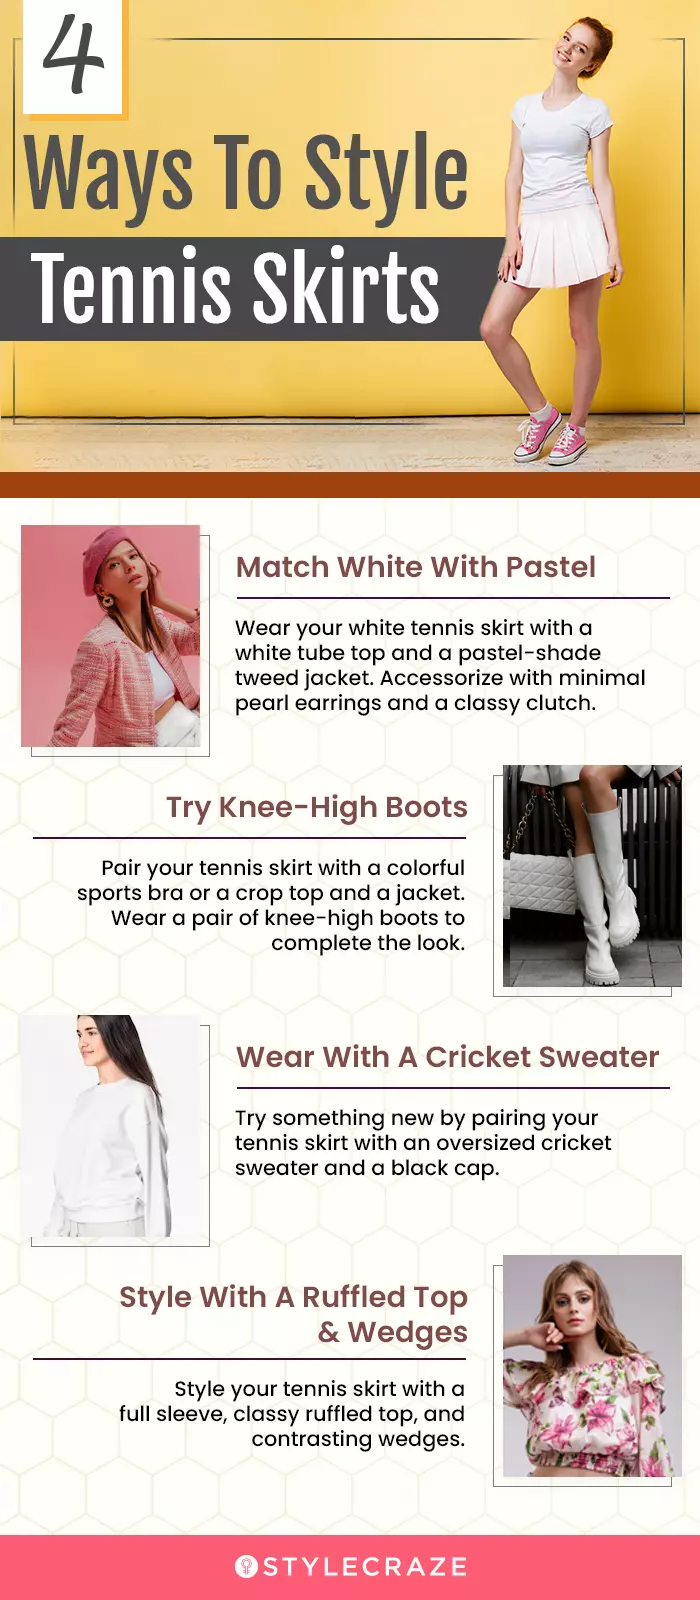 4 Ways To Style Tennis Skirts (infographic)